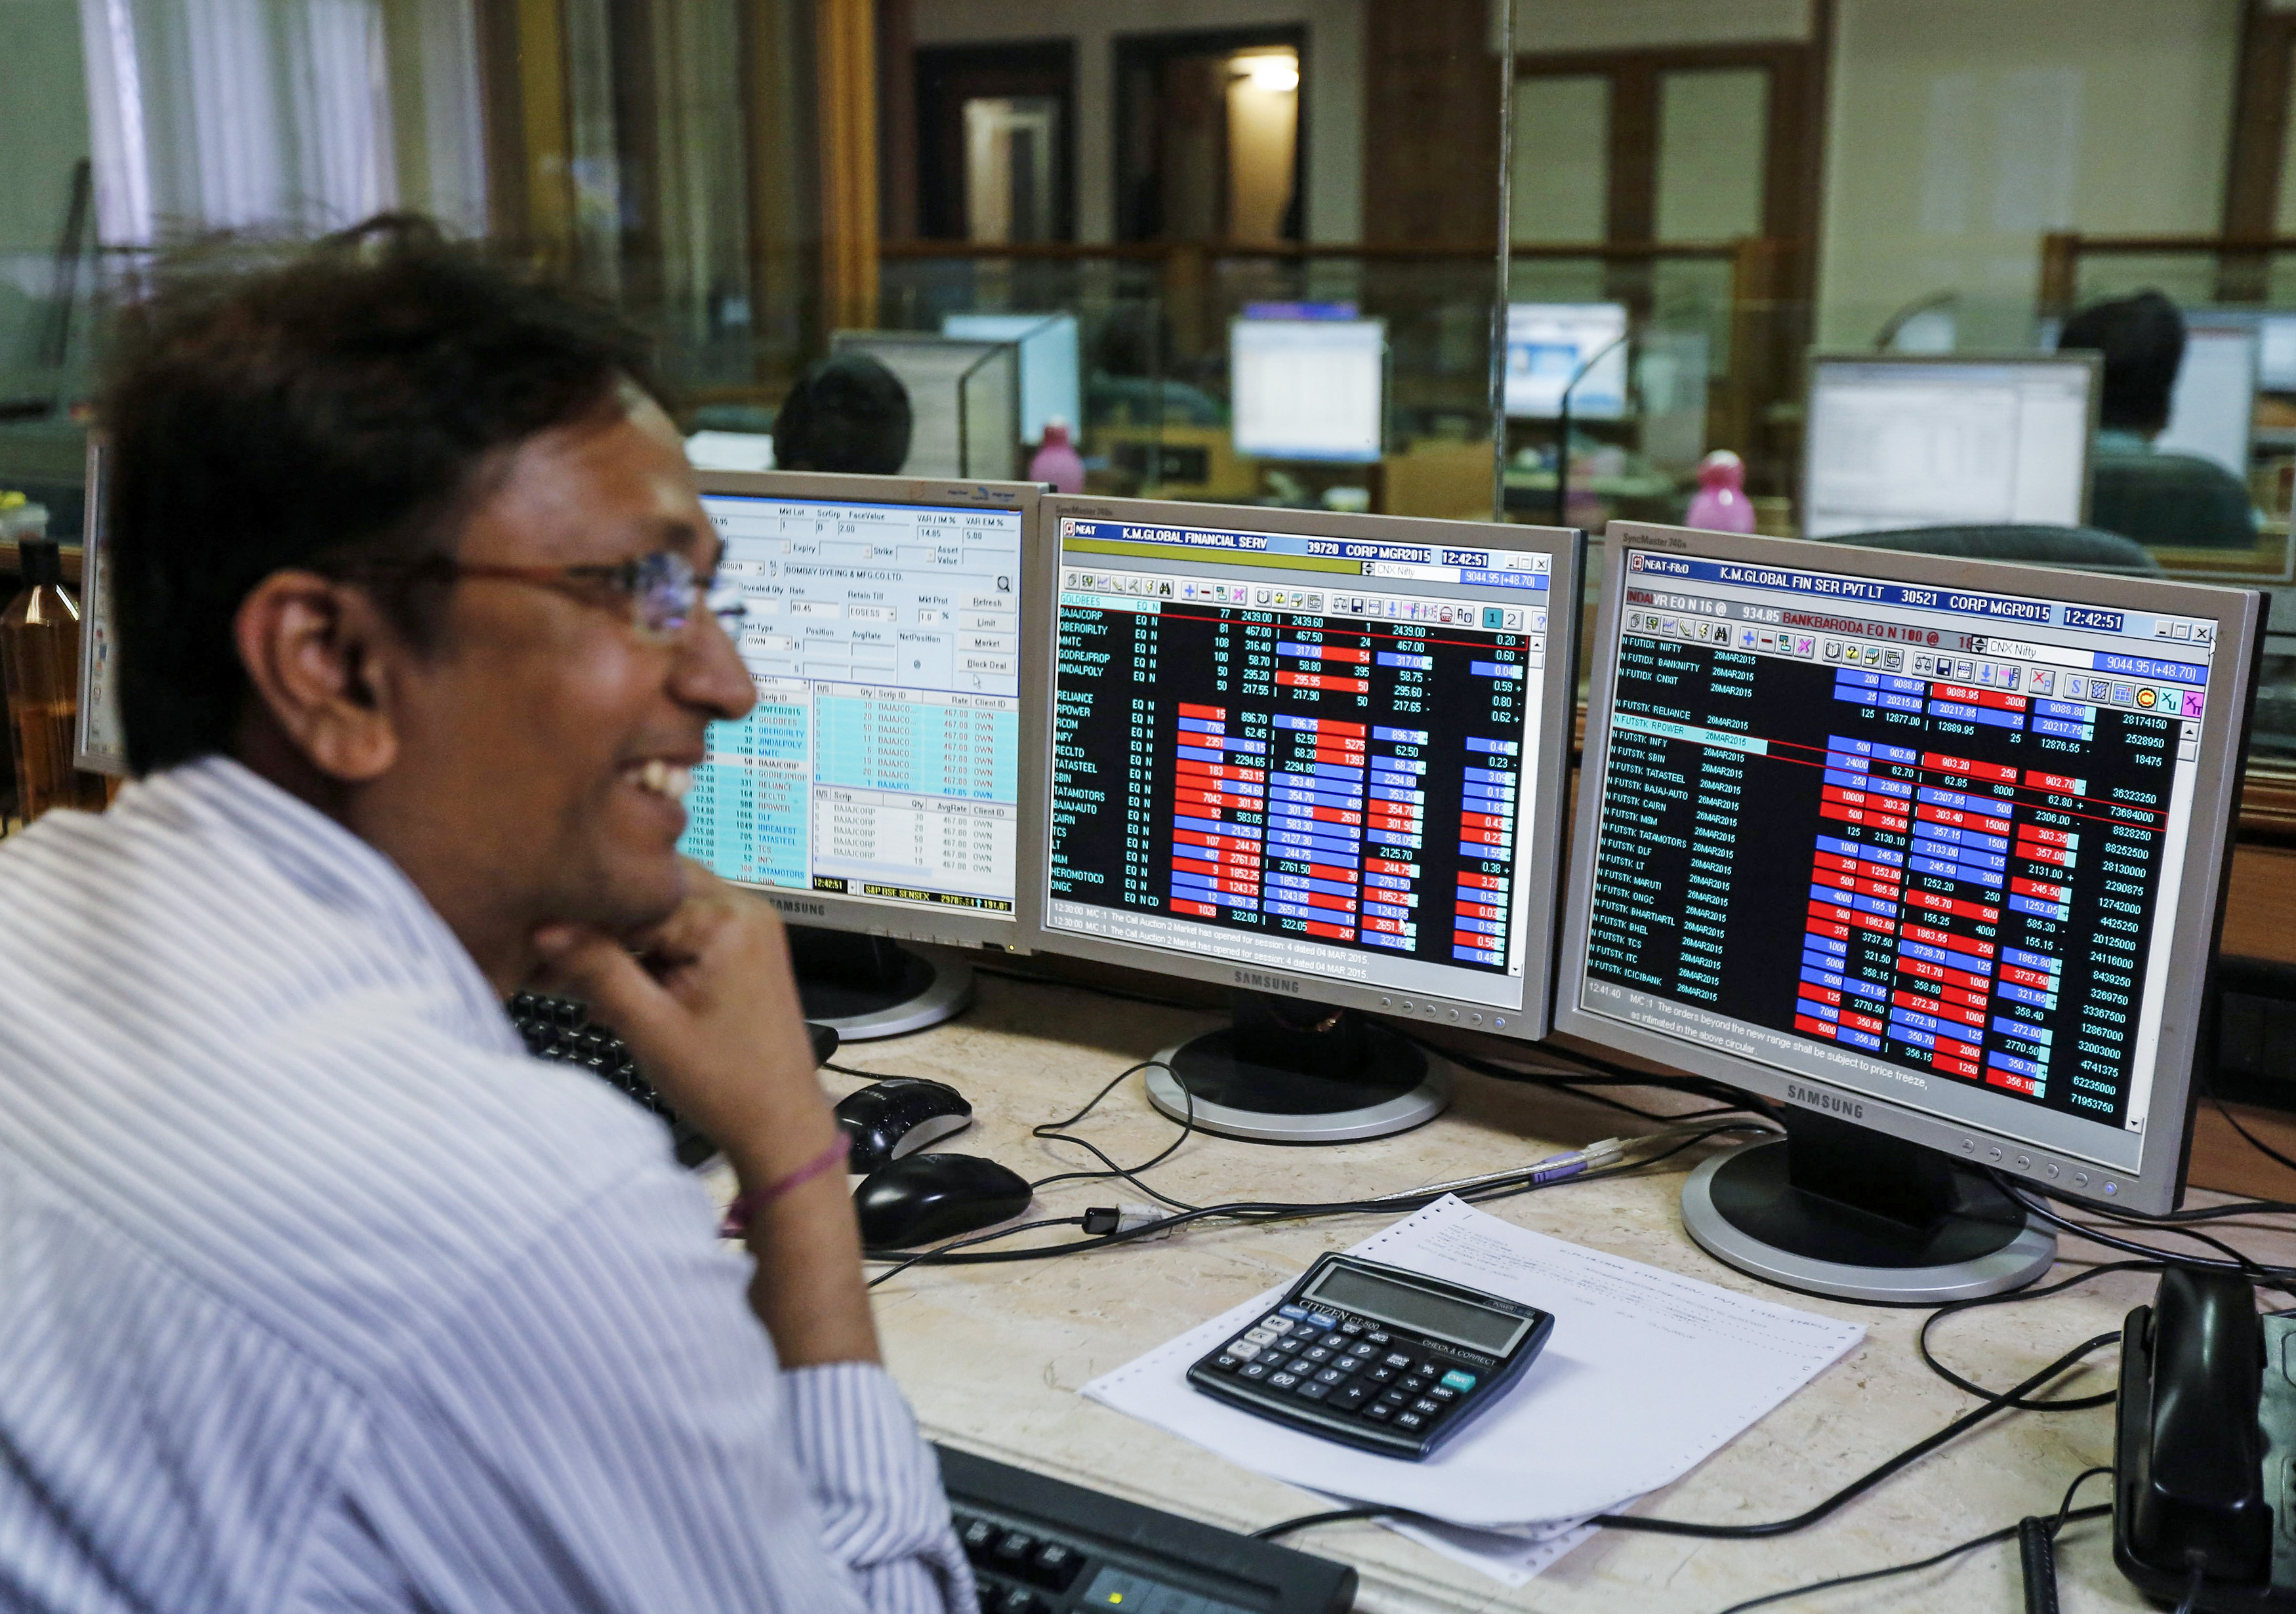 A broker laughs while speaking to a colleague, as they trade on their computer terminals at a stock brokerage firm in Mumbai